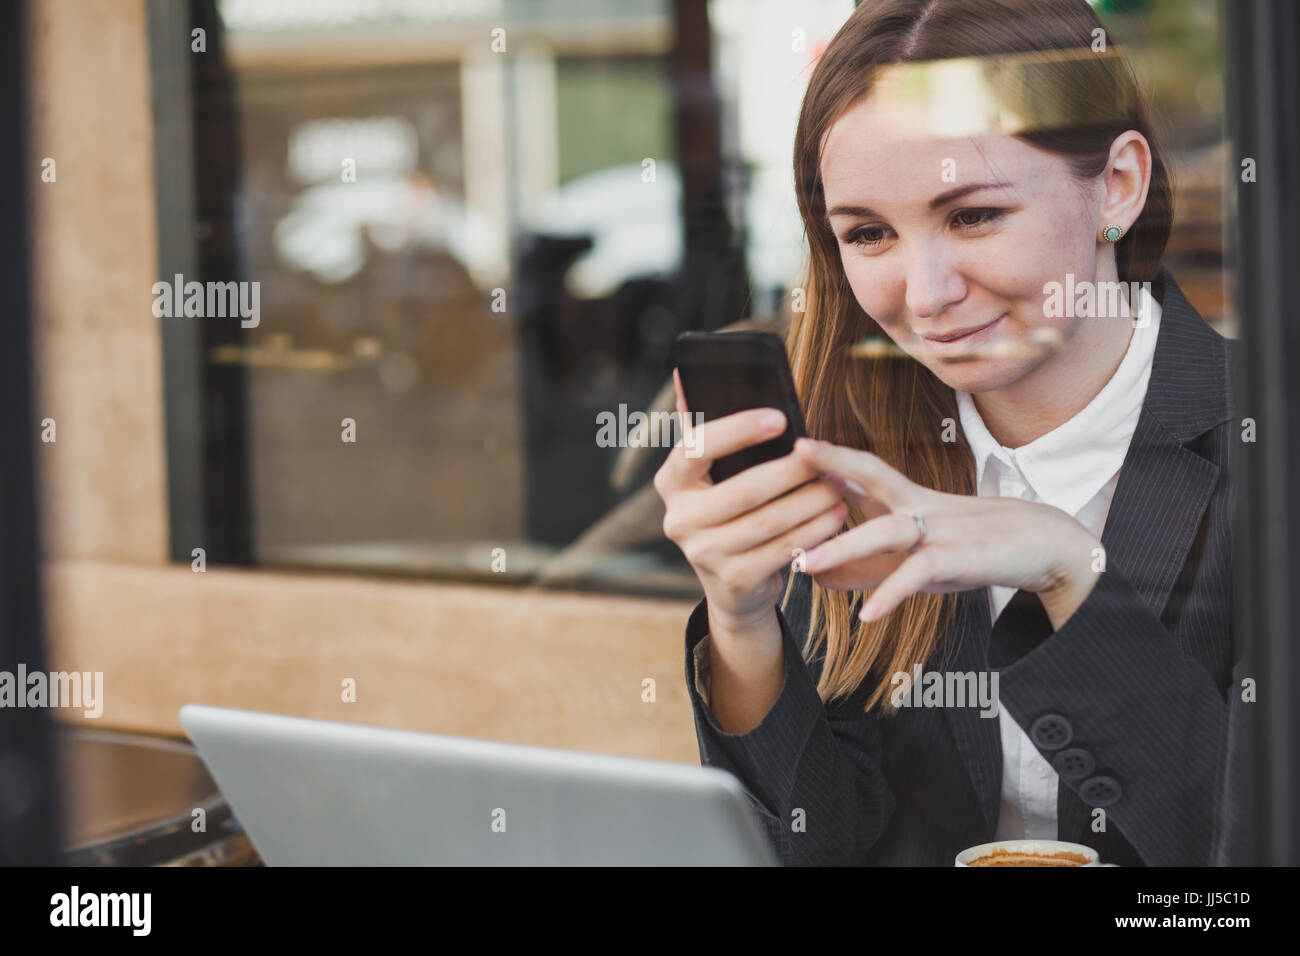 Pretty young woman using smartphone and smiling Banque D'Images